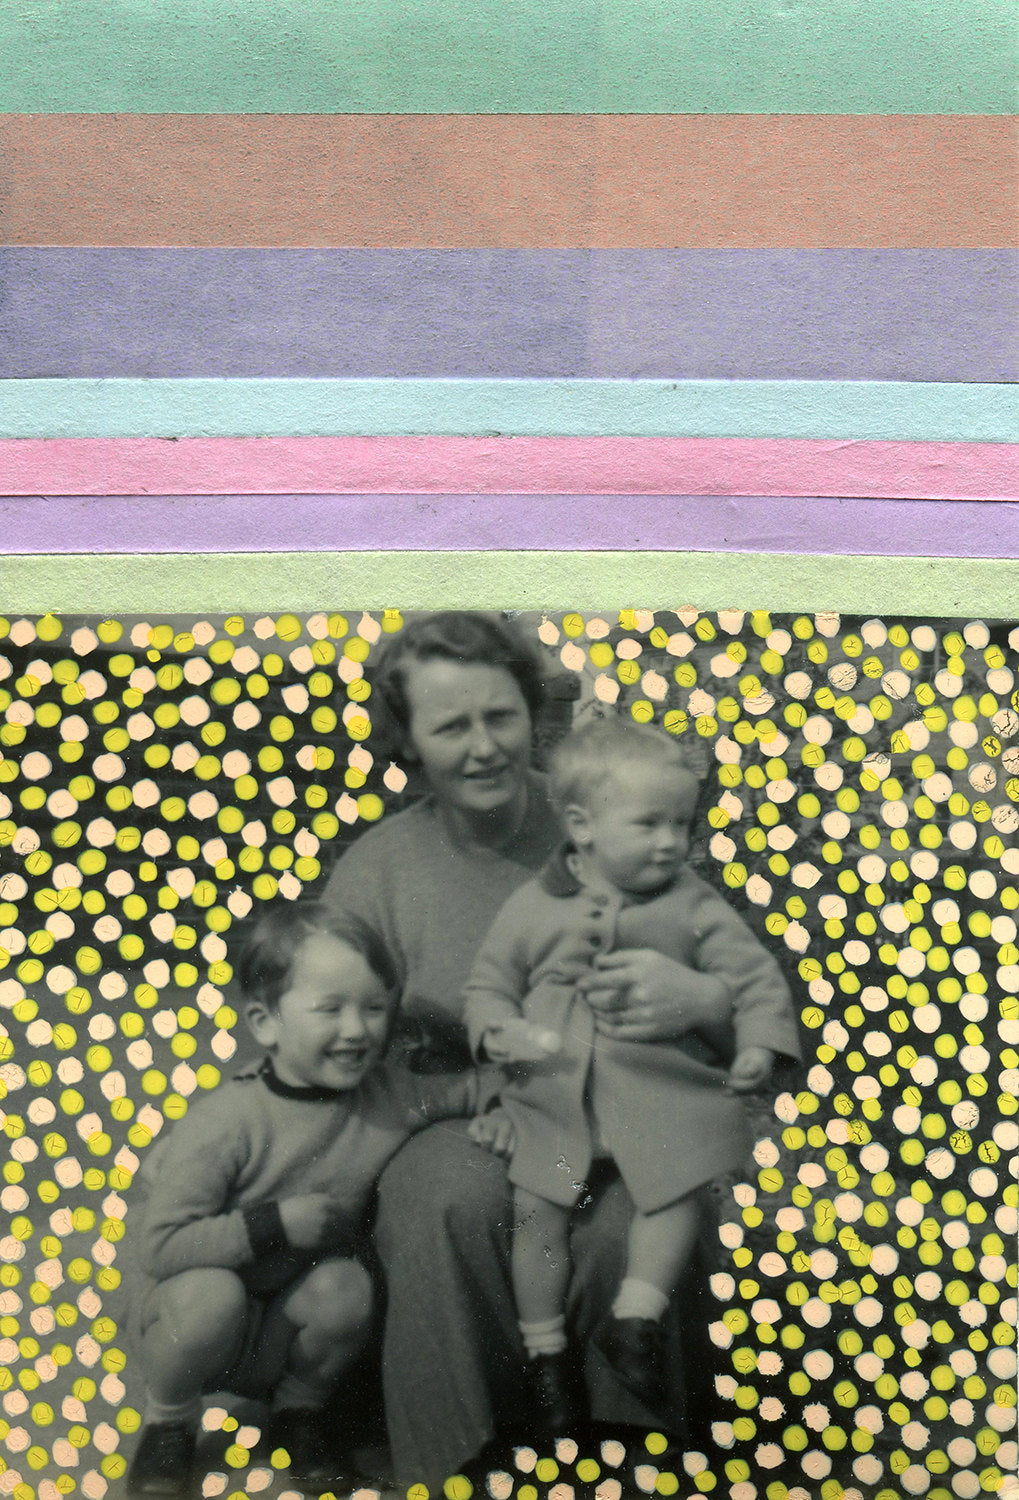 Mother With Child Manipulated With Mixed Media Materials - Naomi Vona Art